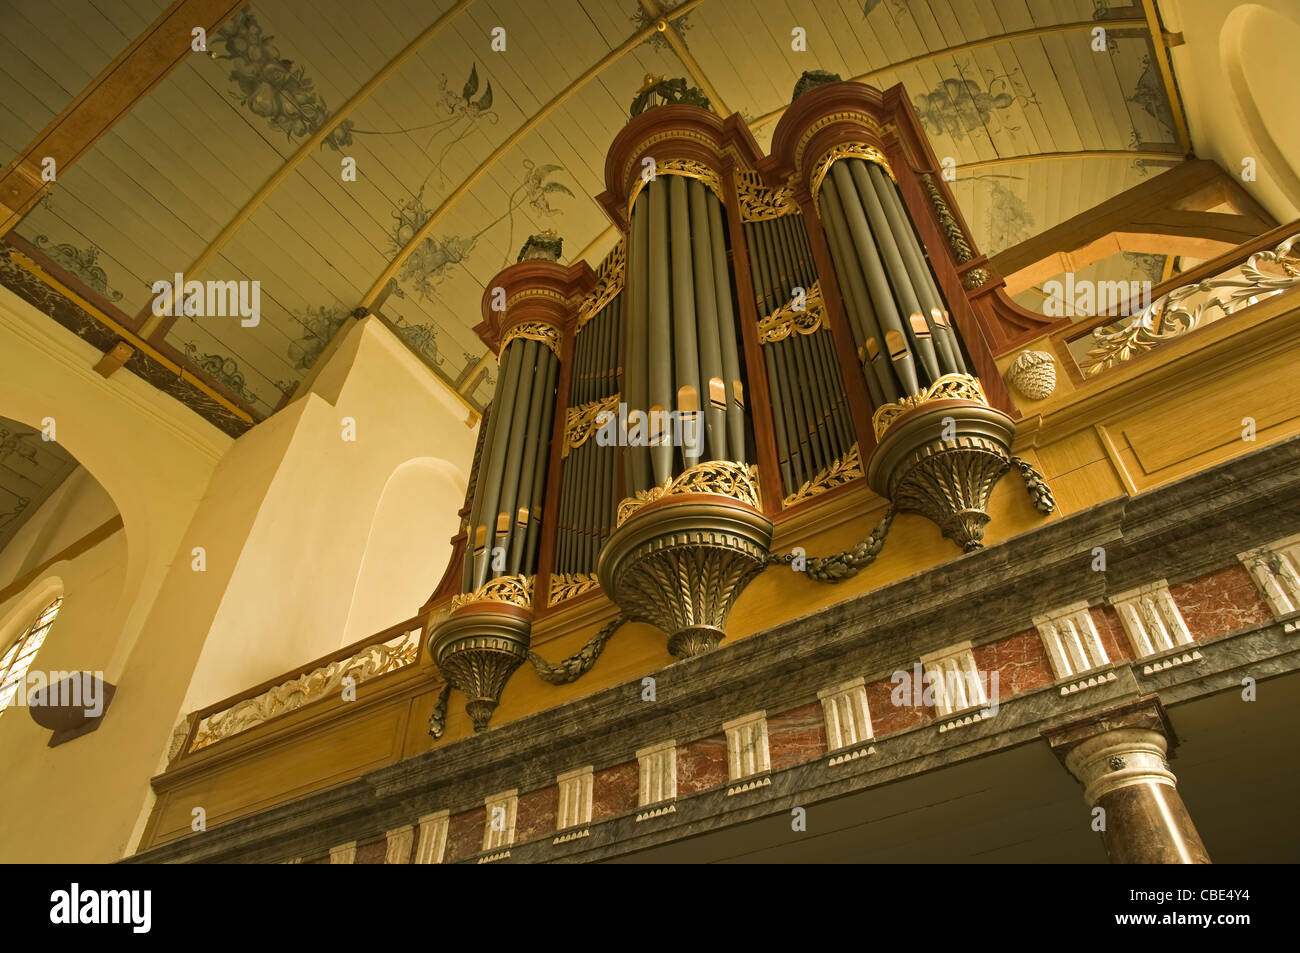 Organ and historic church interior. Broek in Waterland, The Netherlands. Stock Photo